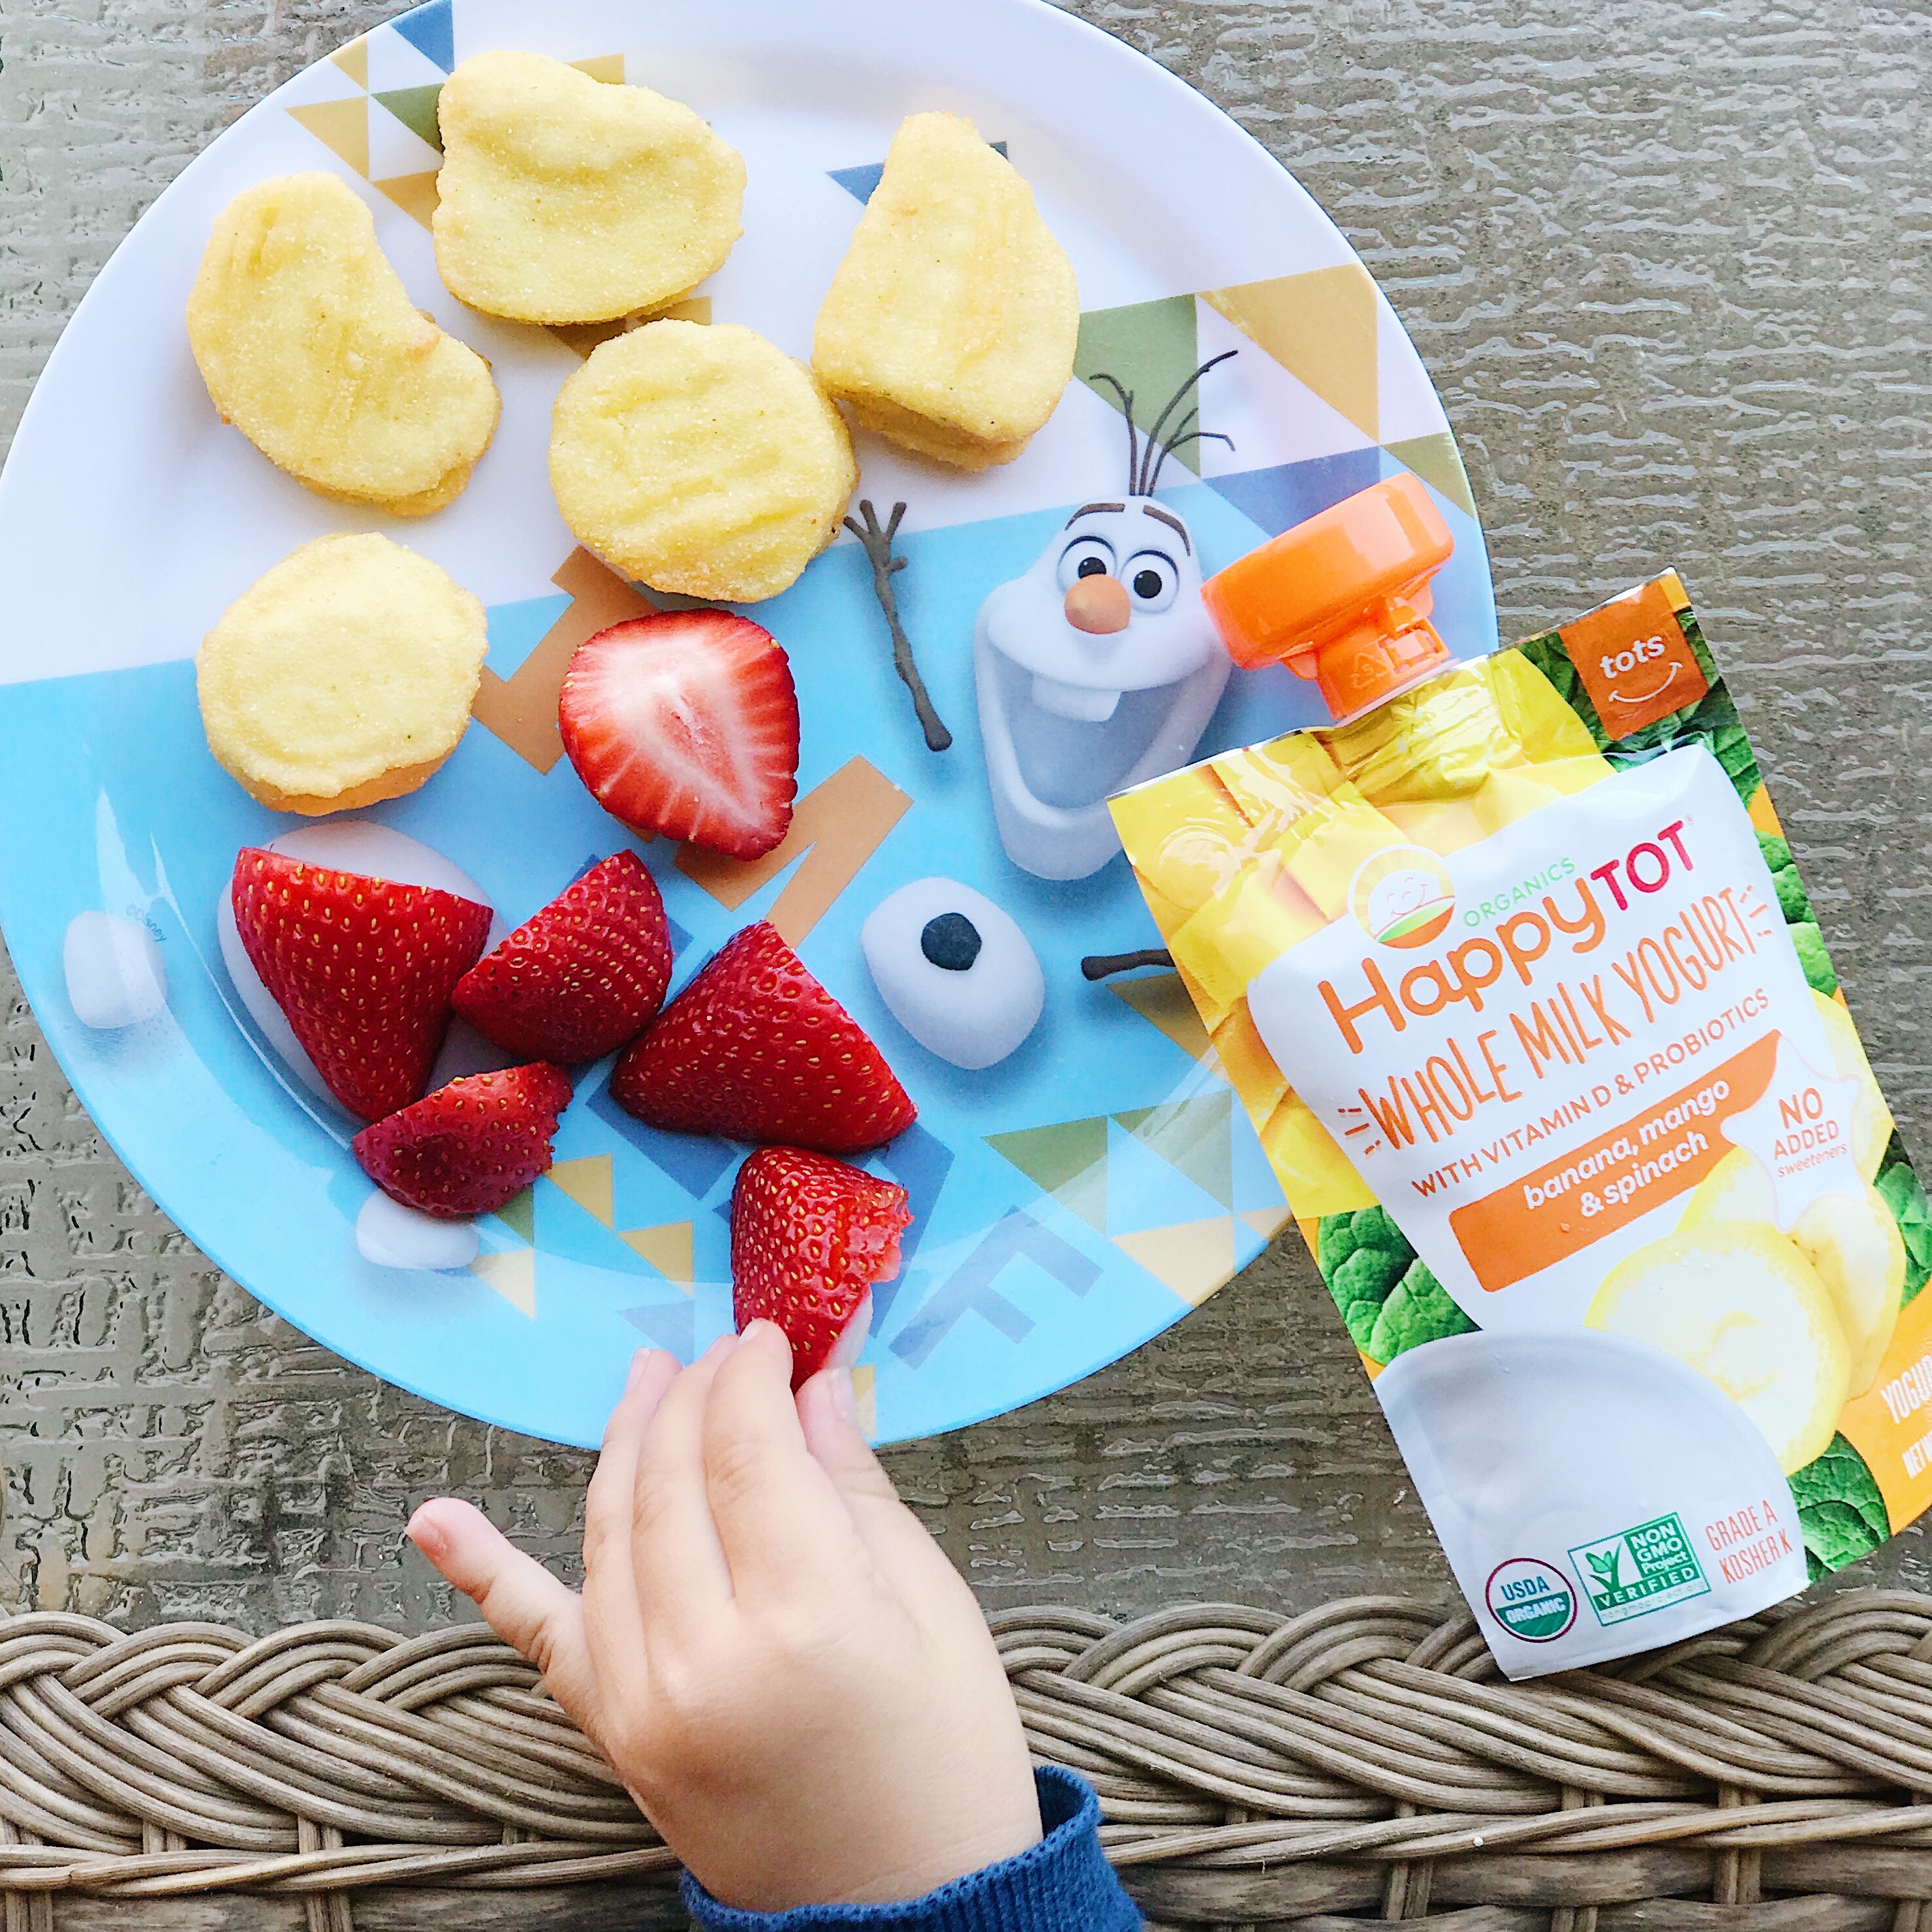 Easy toddler meal to enjoy outside. Perfect for spring weather!